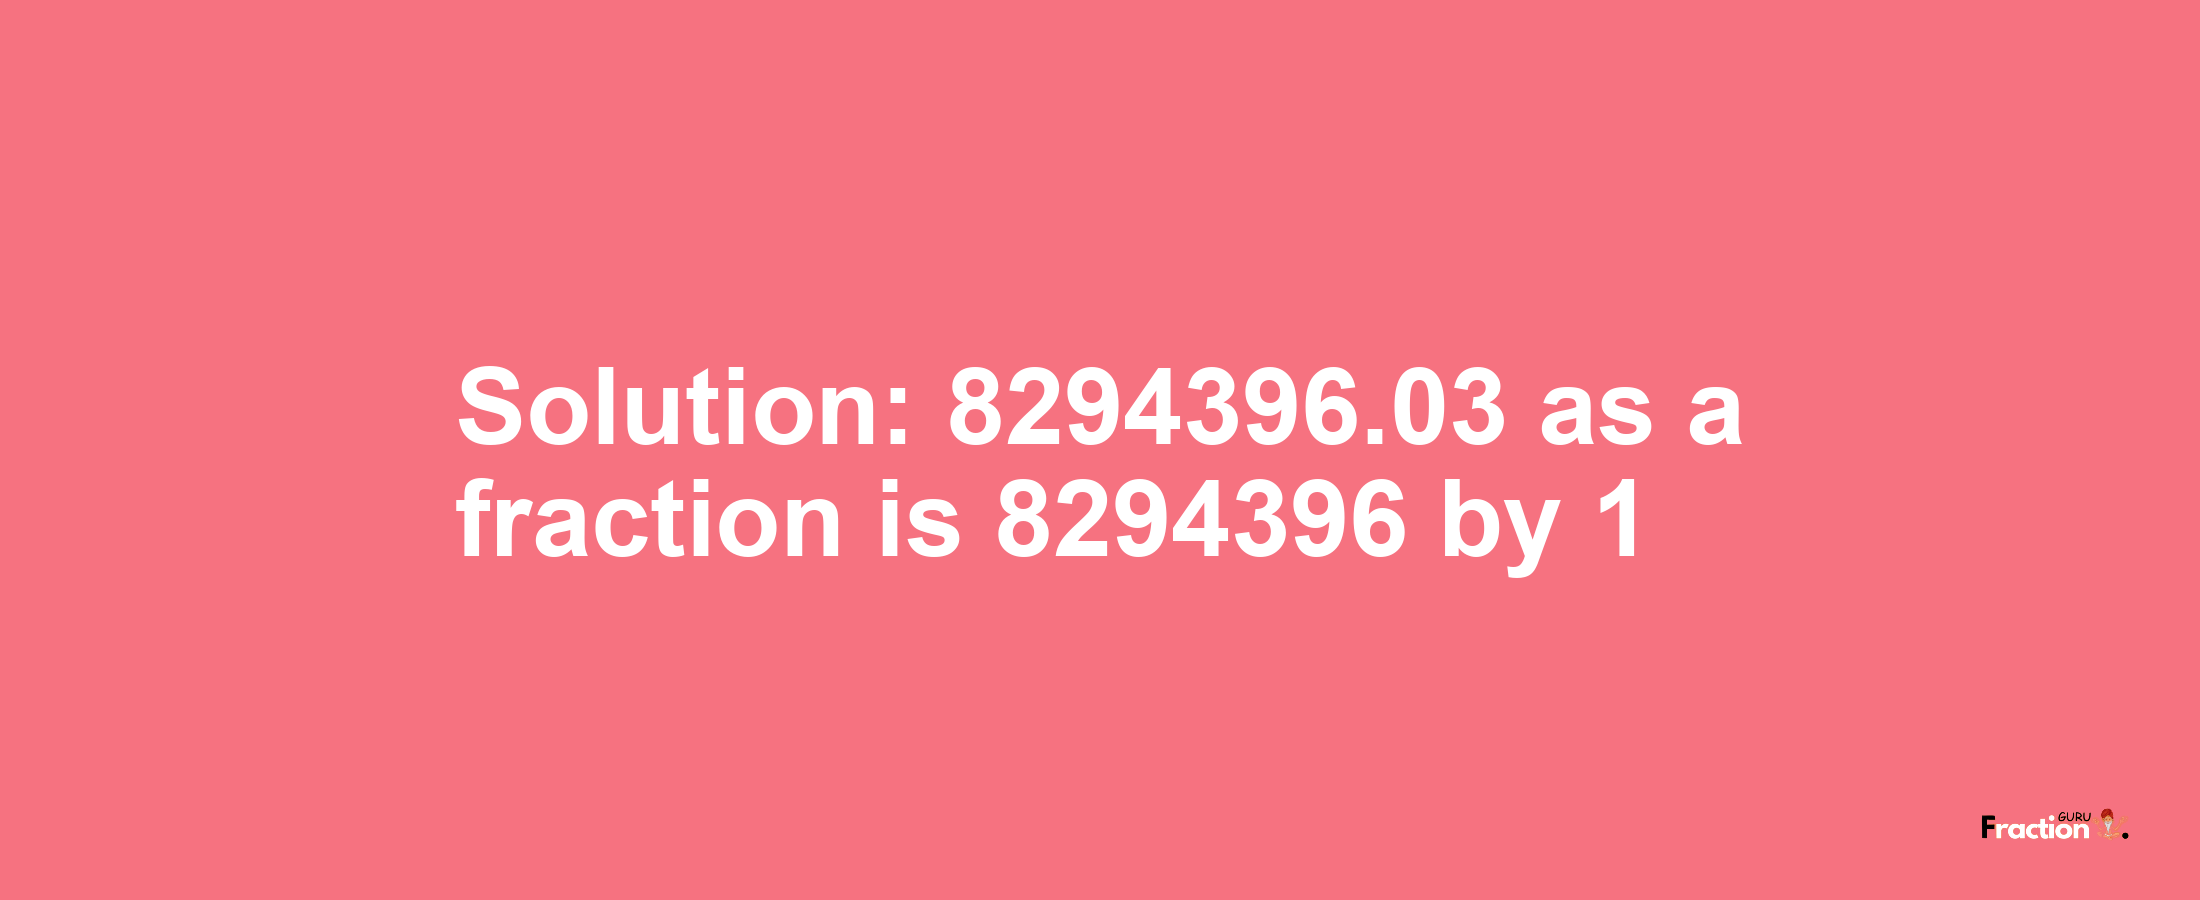 Solution:8294396.03 as a fraction is 8294396/1